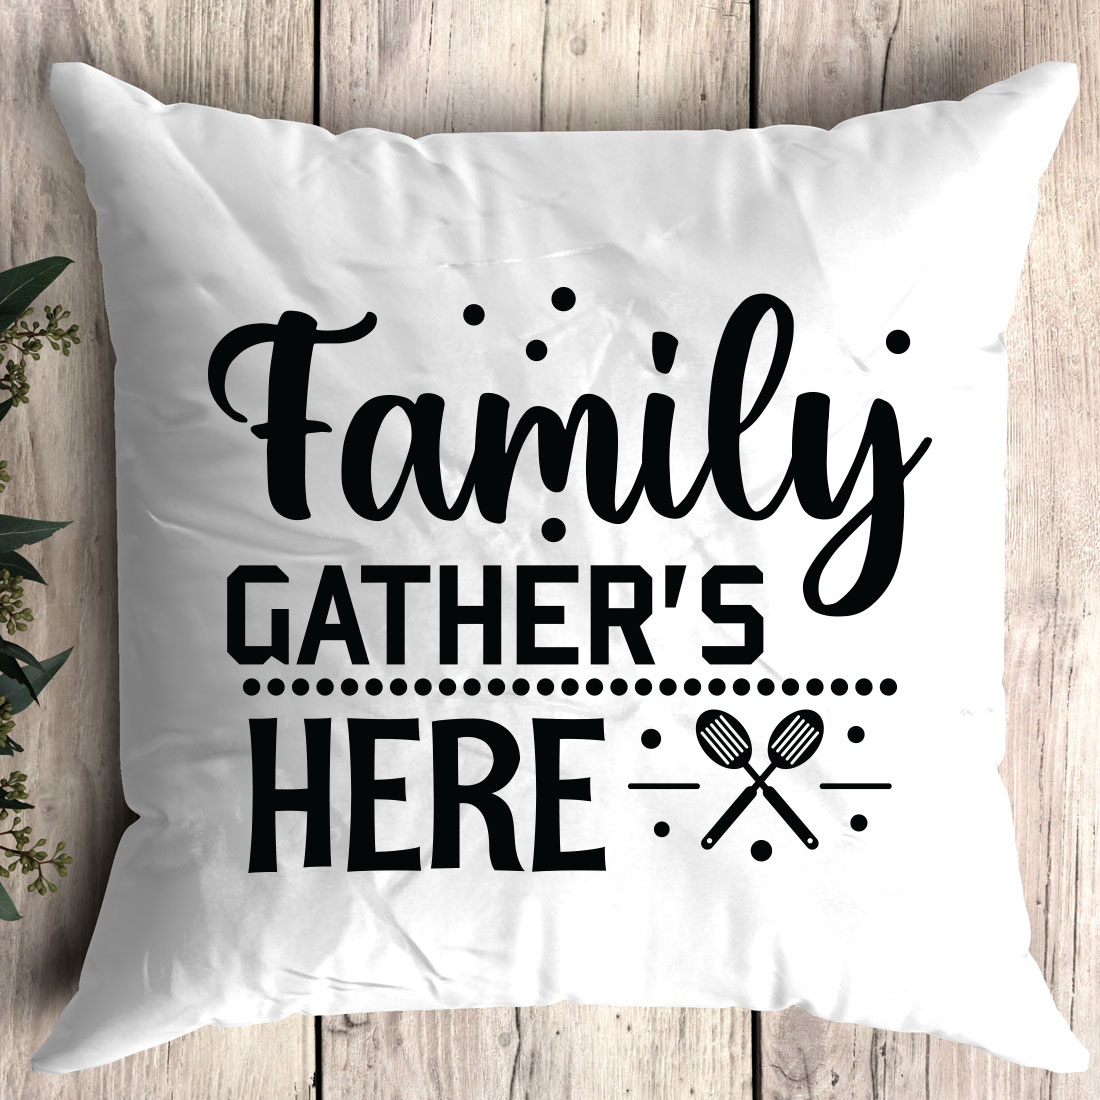 Pillow that says family gather's here.